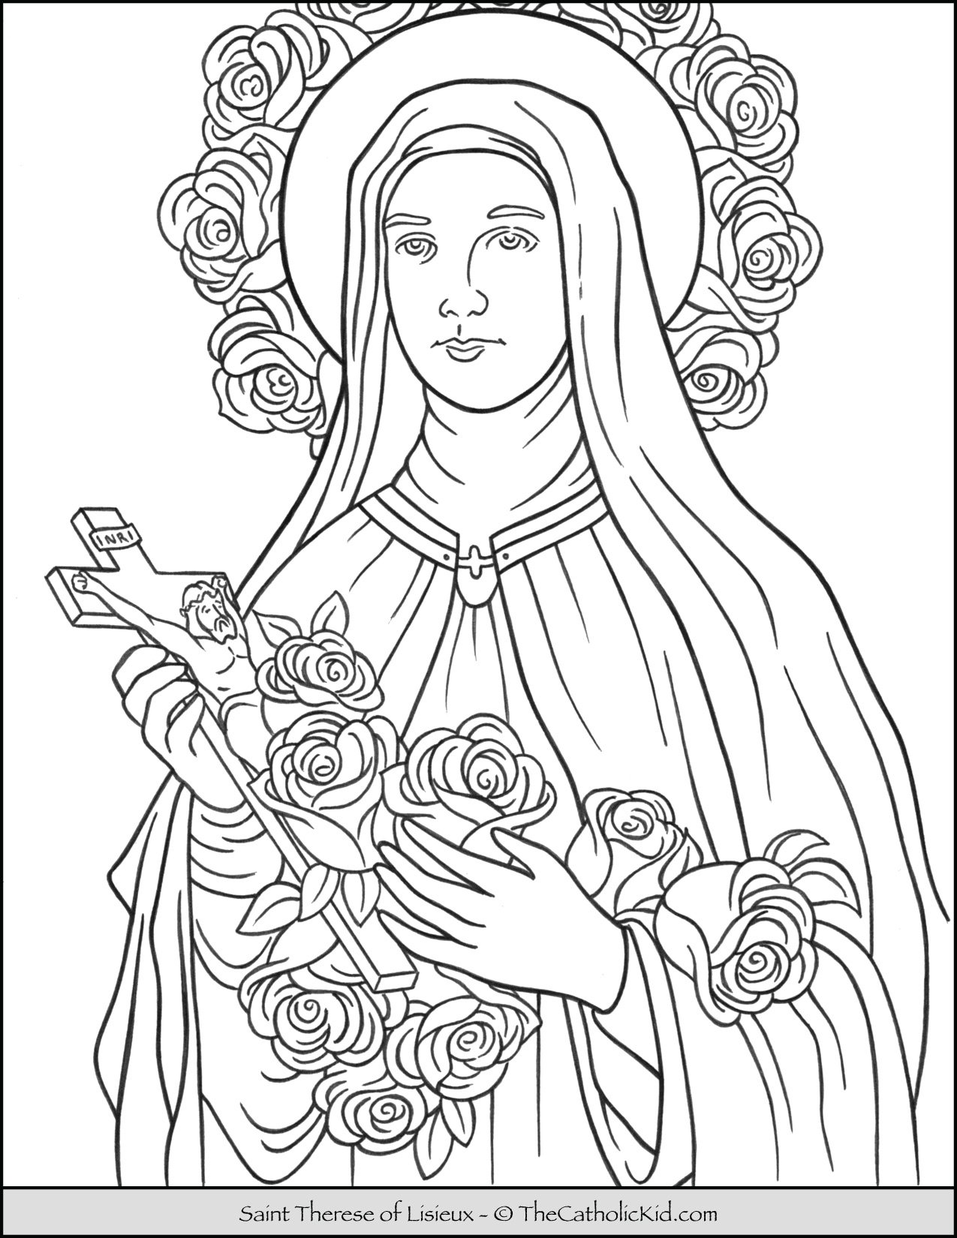 St Therese Of Lisieux Coloring Page 8